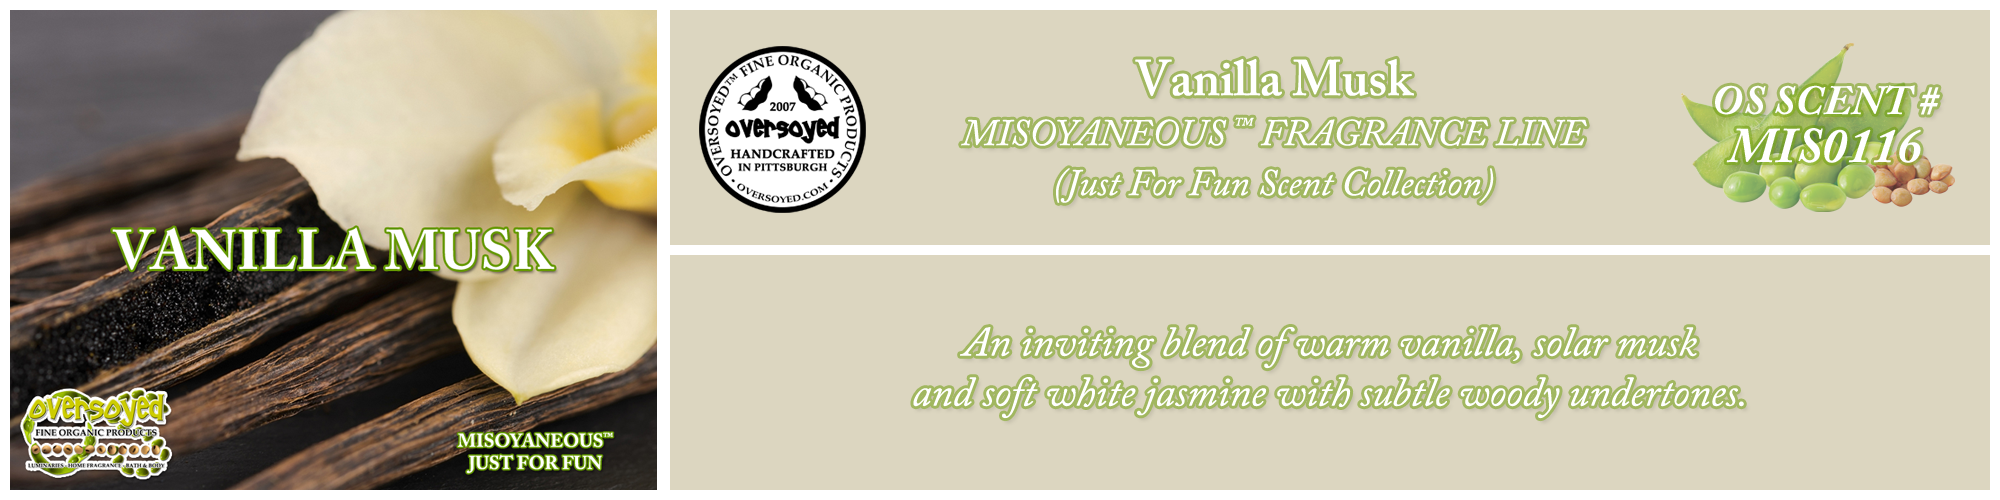 Vanilla Musk Handcrafted Products Collection